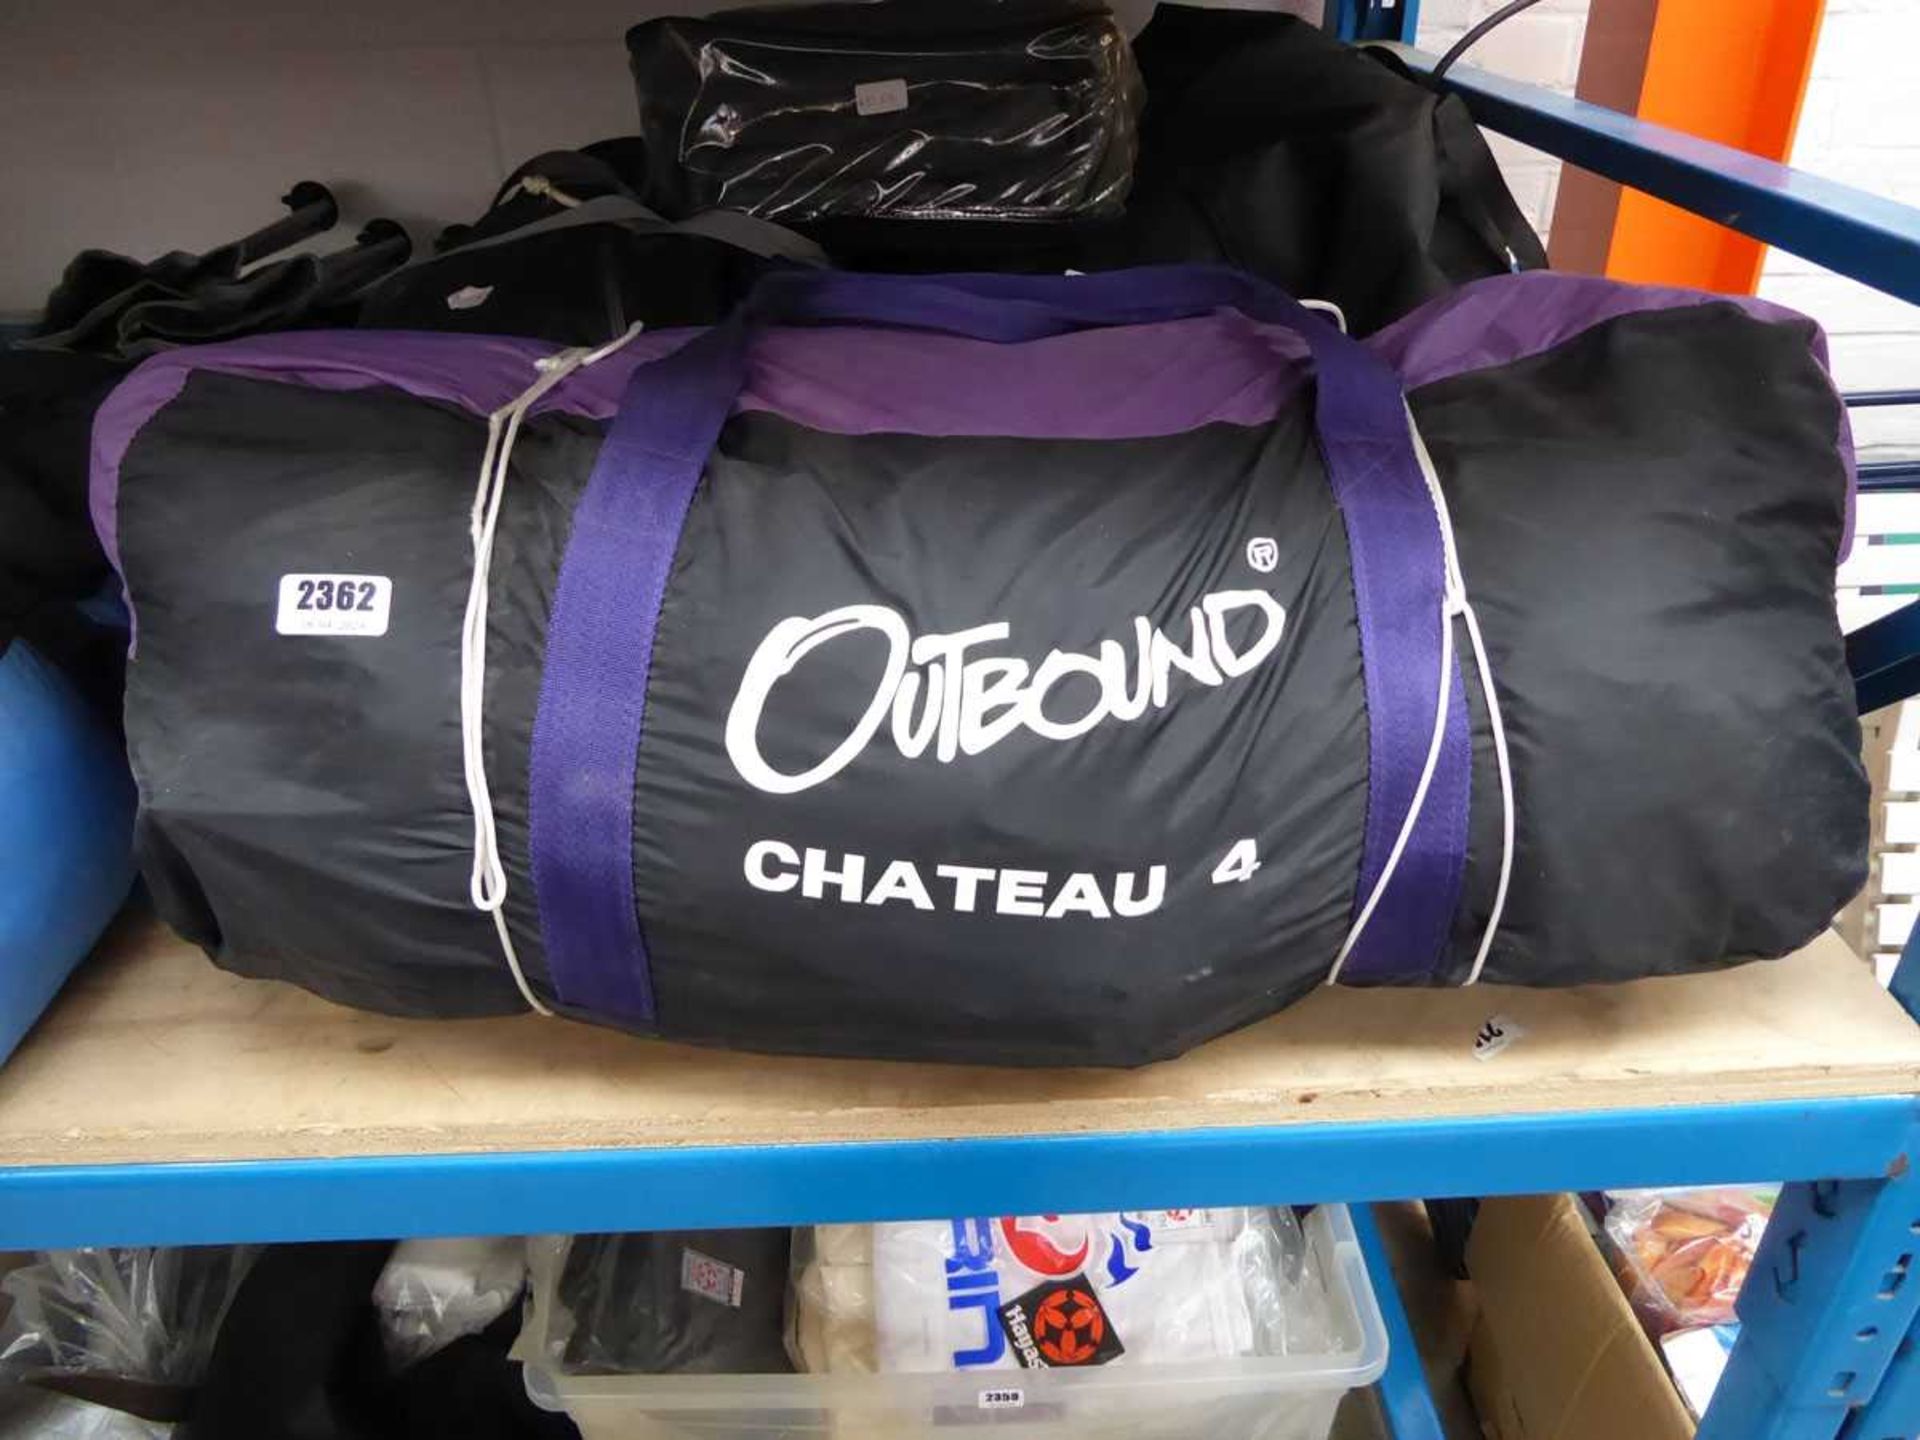 Outbond chateau 4 person tent